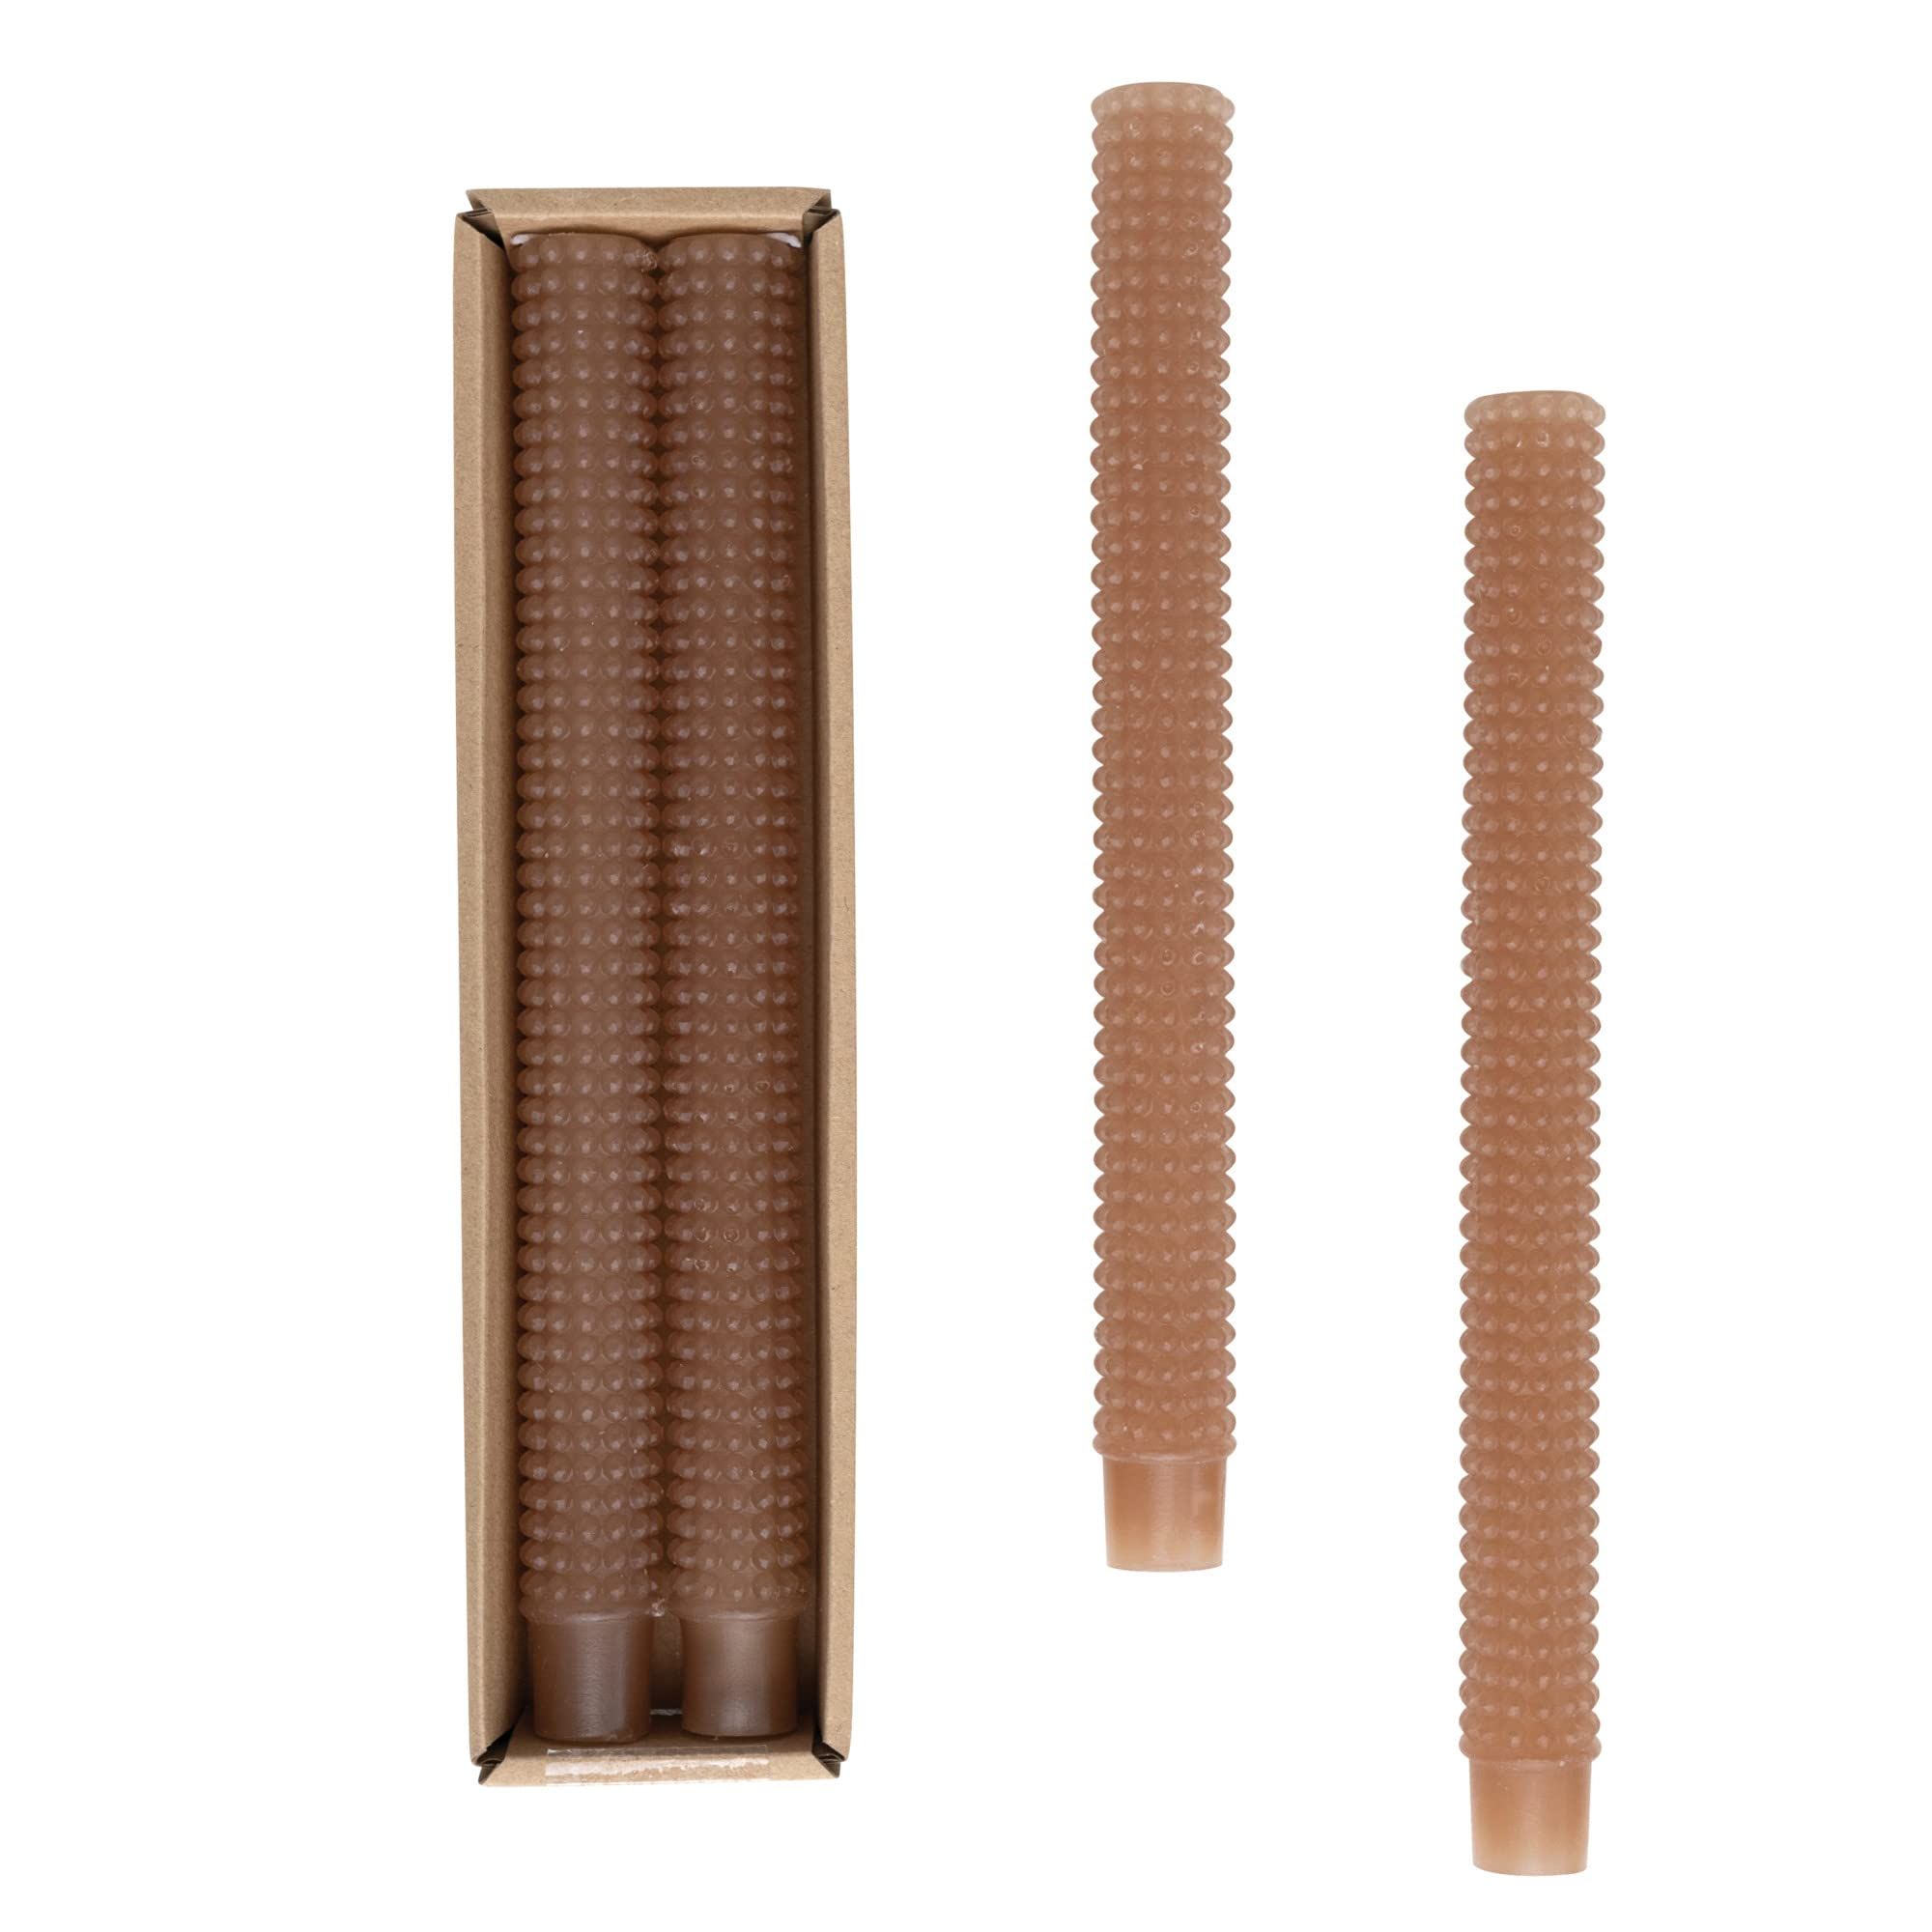 Creative Co-Op Unscented Hobnail Taper Box, Set of 2, Cappuccino Candles, 1" L x 1" W x 10" H, Brown | Amazon (US)